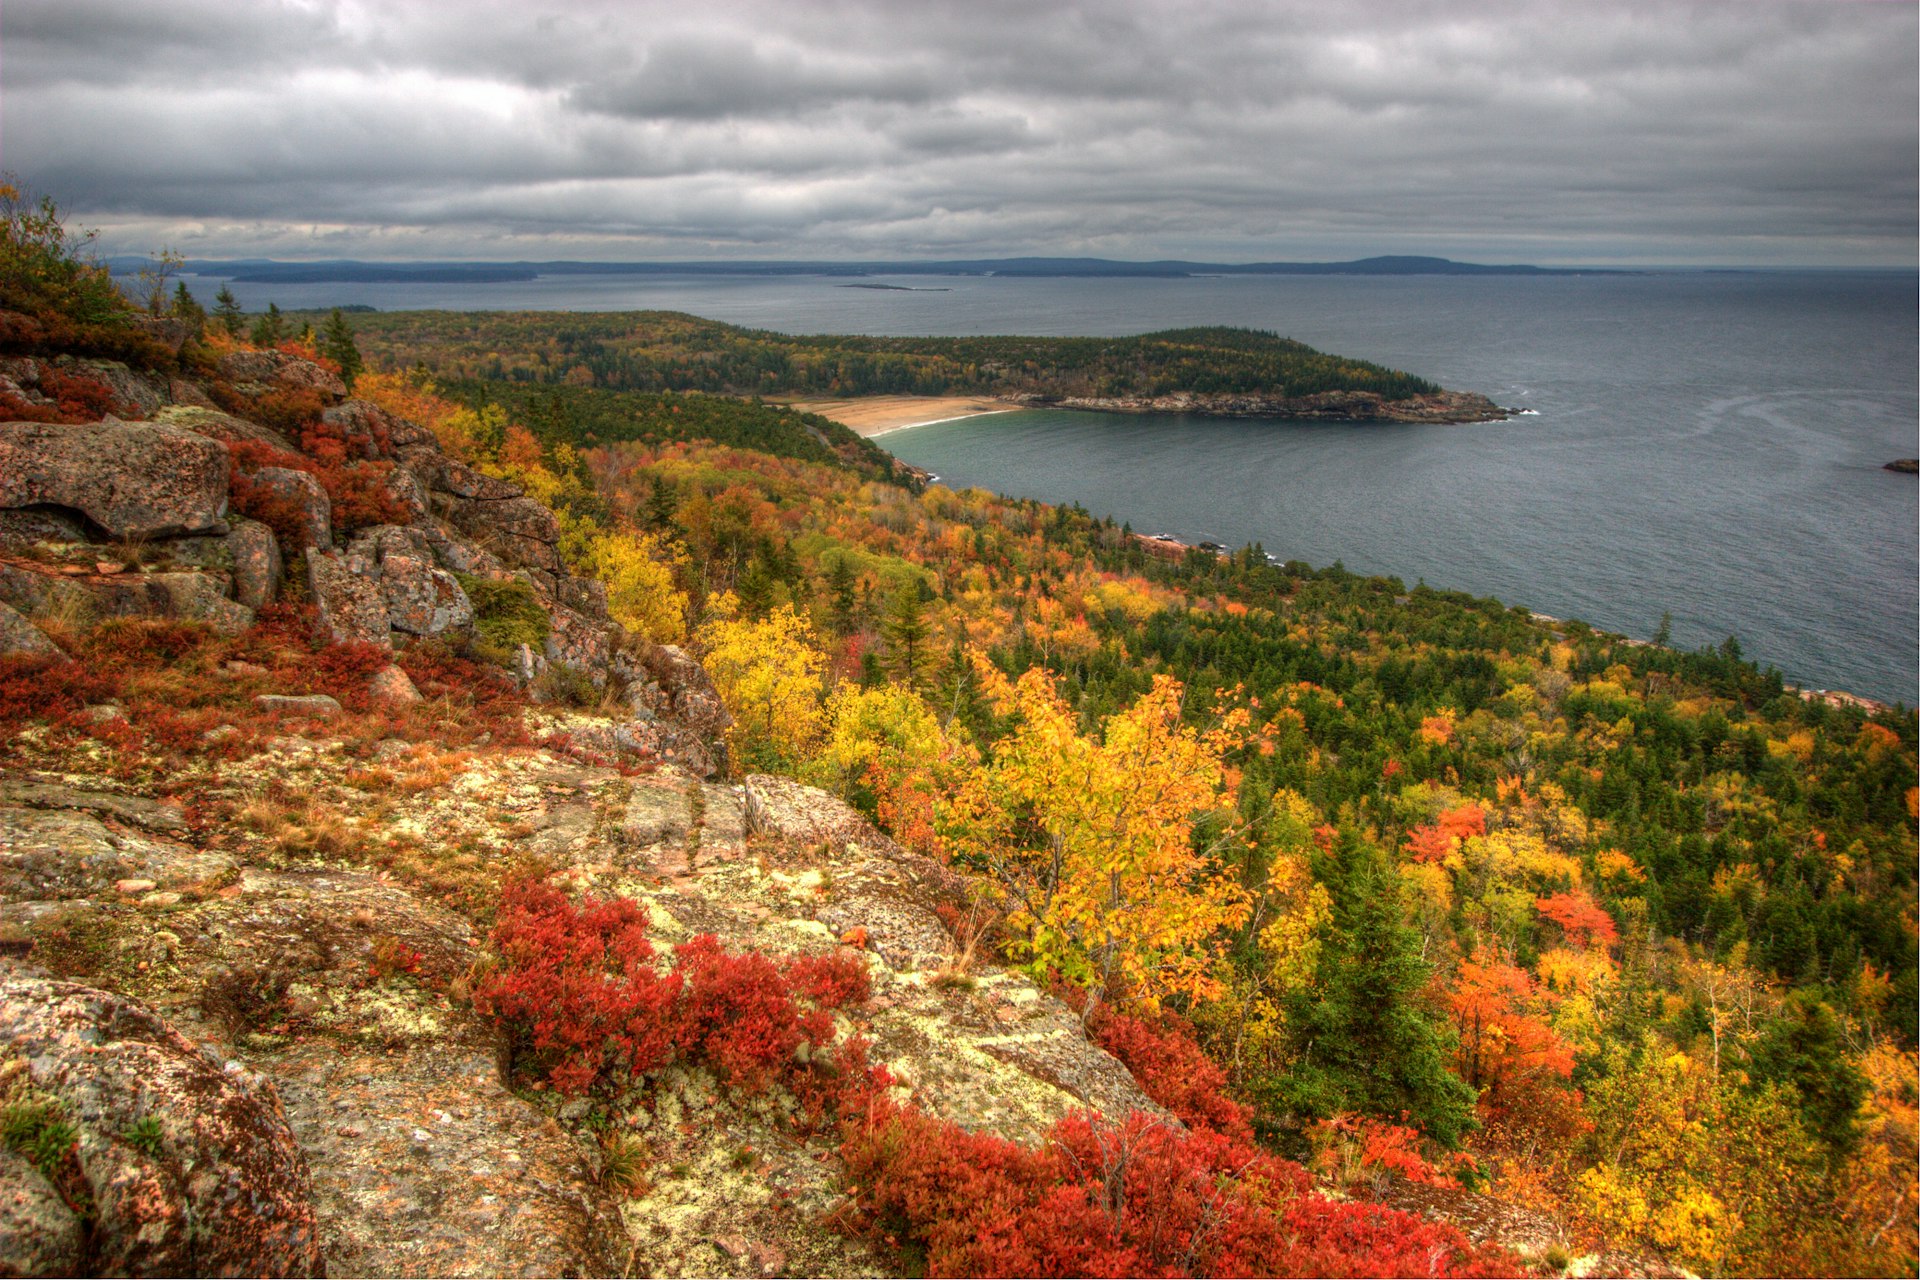 Fall foliage seen from the top of Gorham Mountain, Acadia National Park, Maine, USA